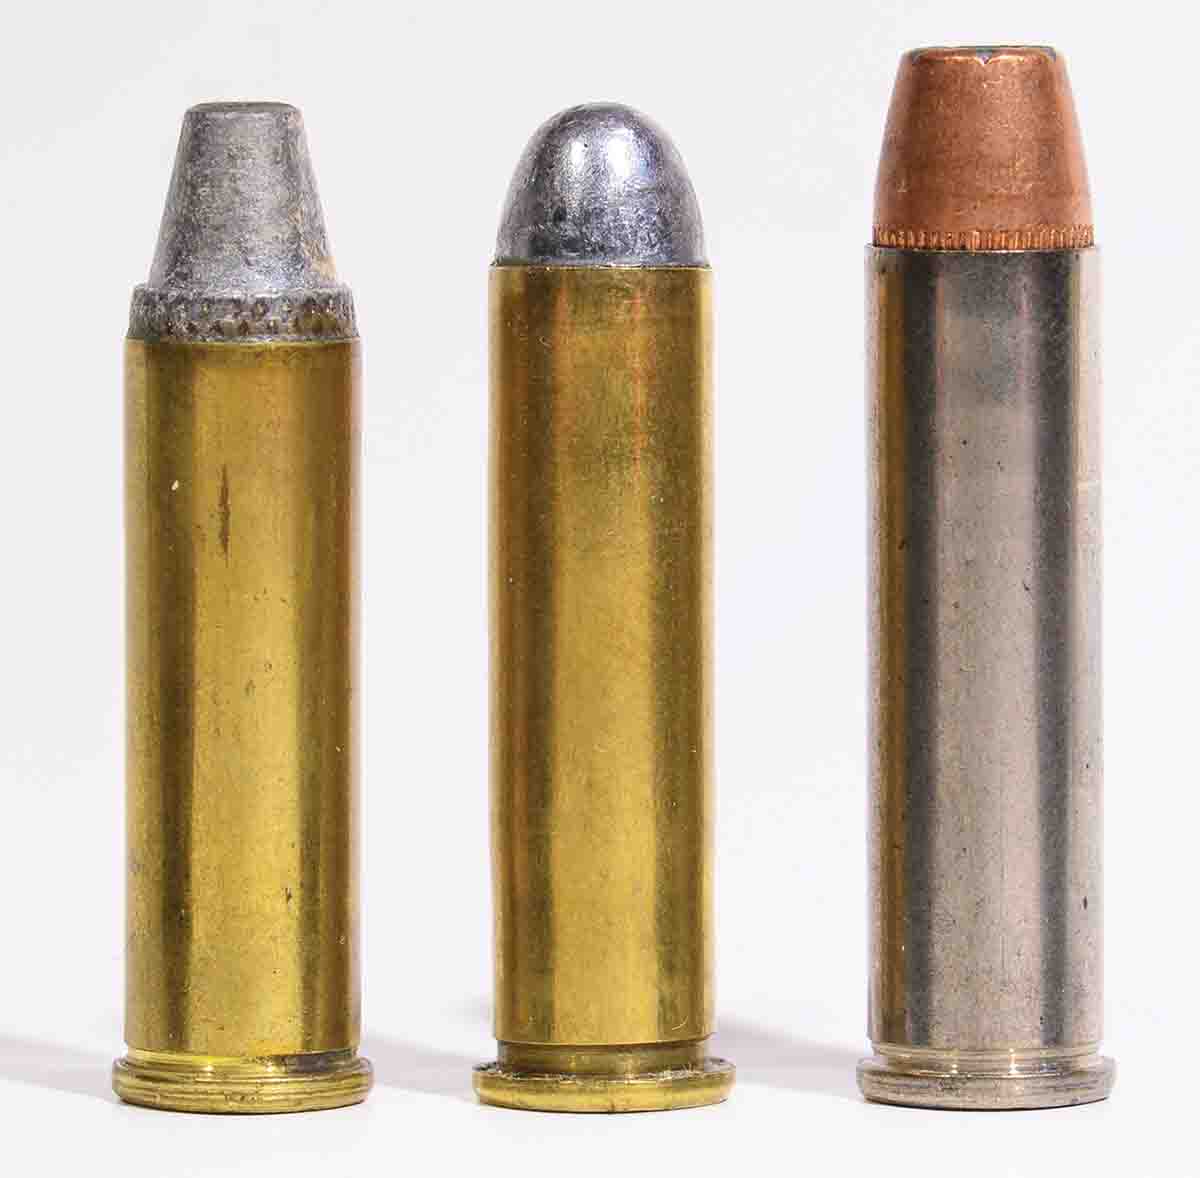 Comparable cartridges, left to right: .32 H&R Magnum, .300 Rook and .327 Federal.